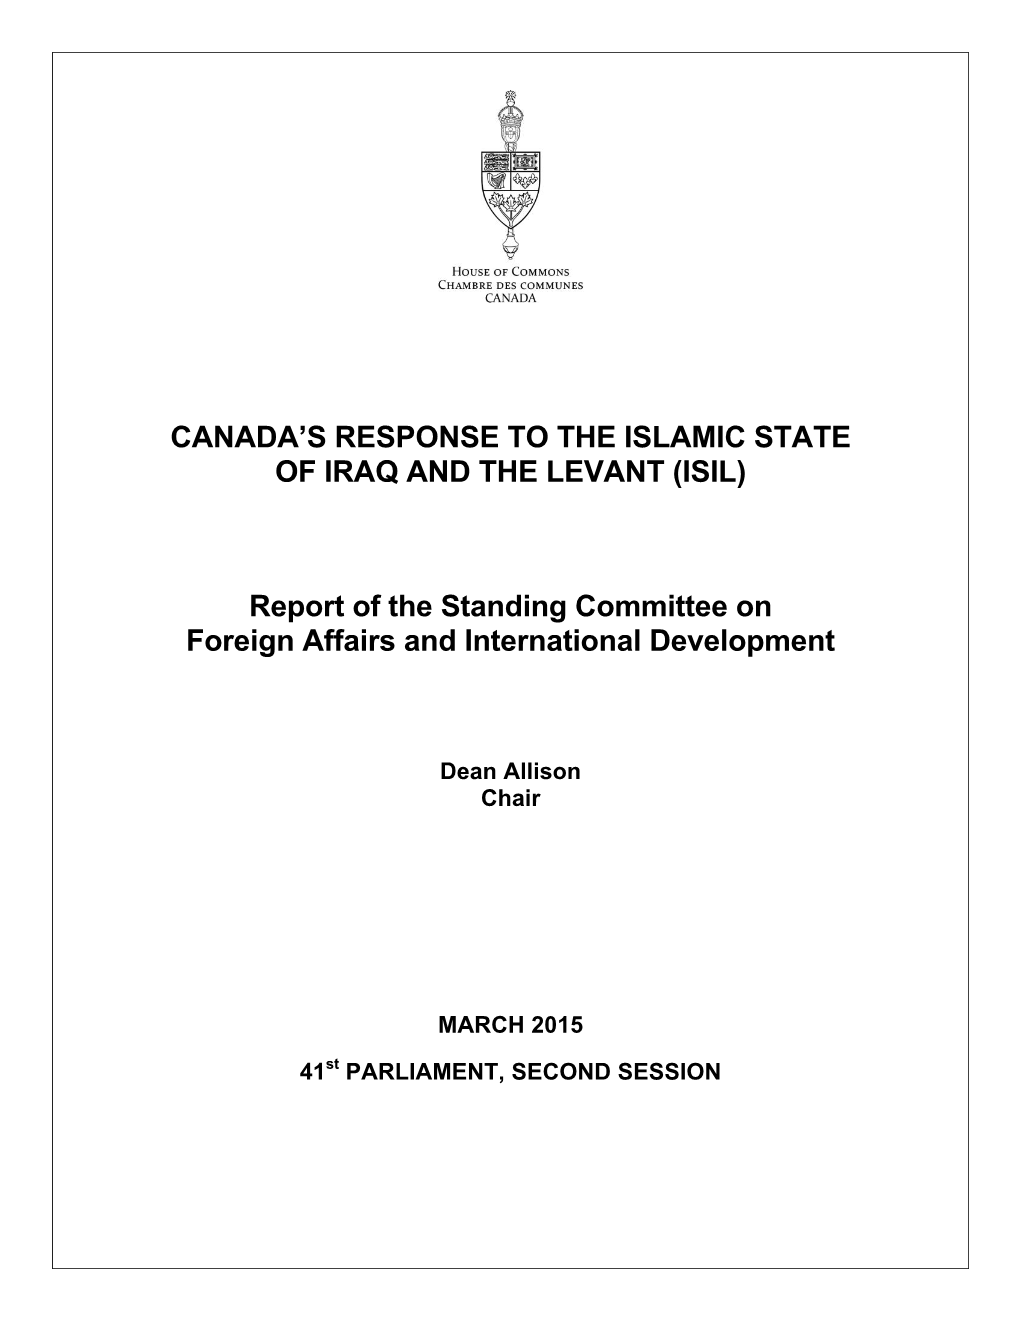 (ISIL) Report of the Standing Committee on Foreign Affairs and I